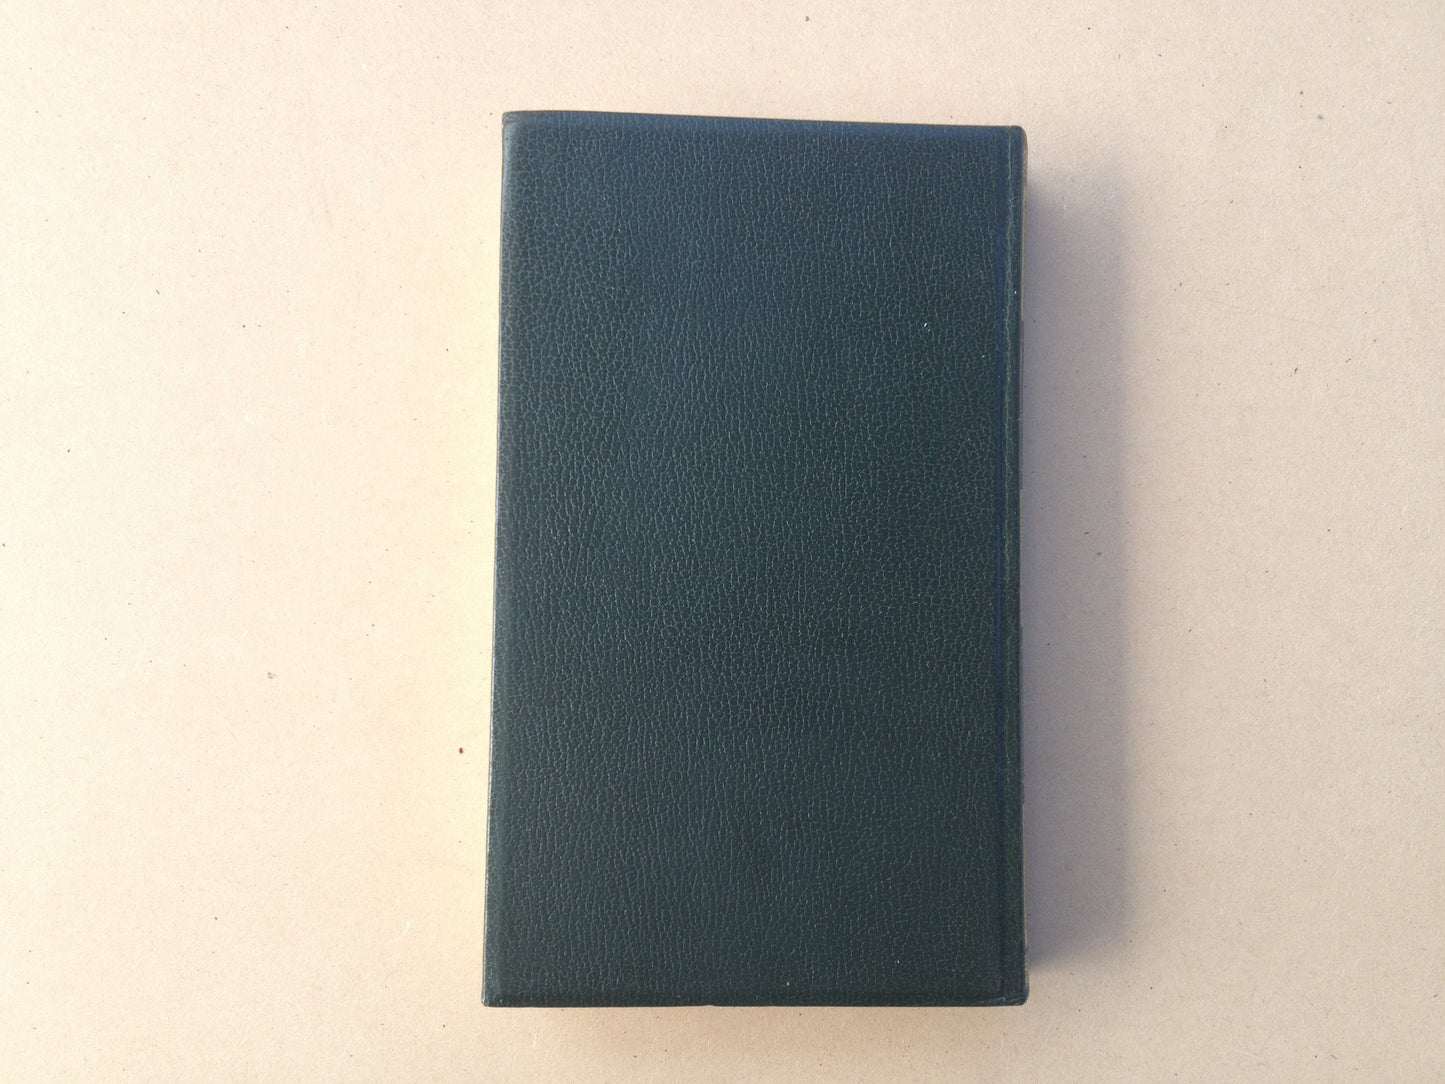 DH Lawrence Complete Works The Plumed Serpent by Heron Books London